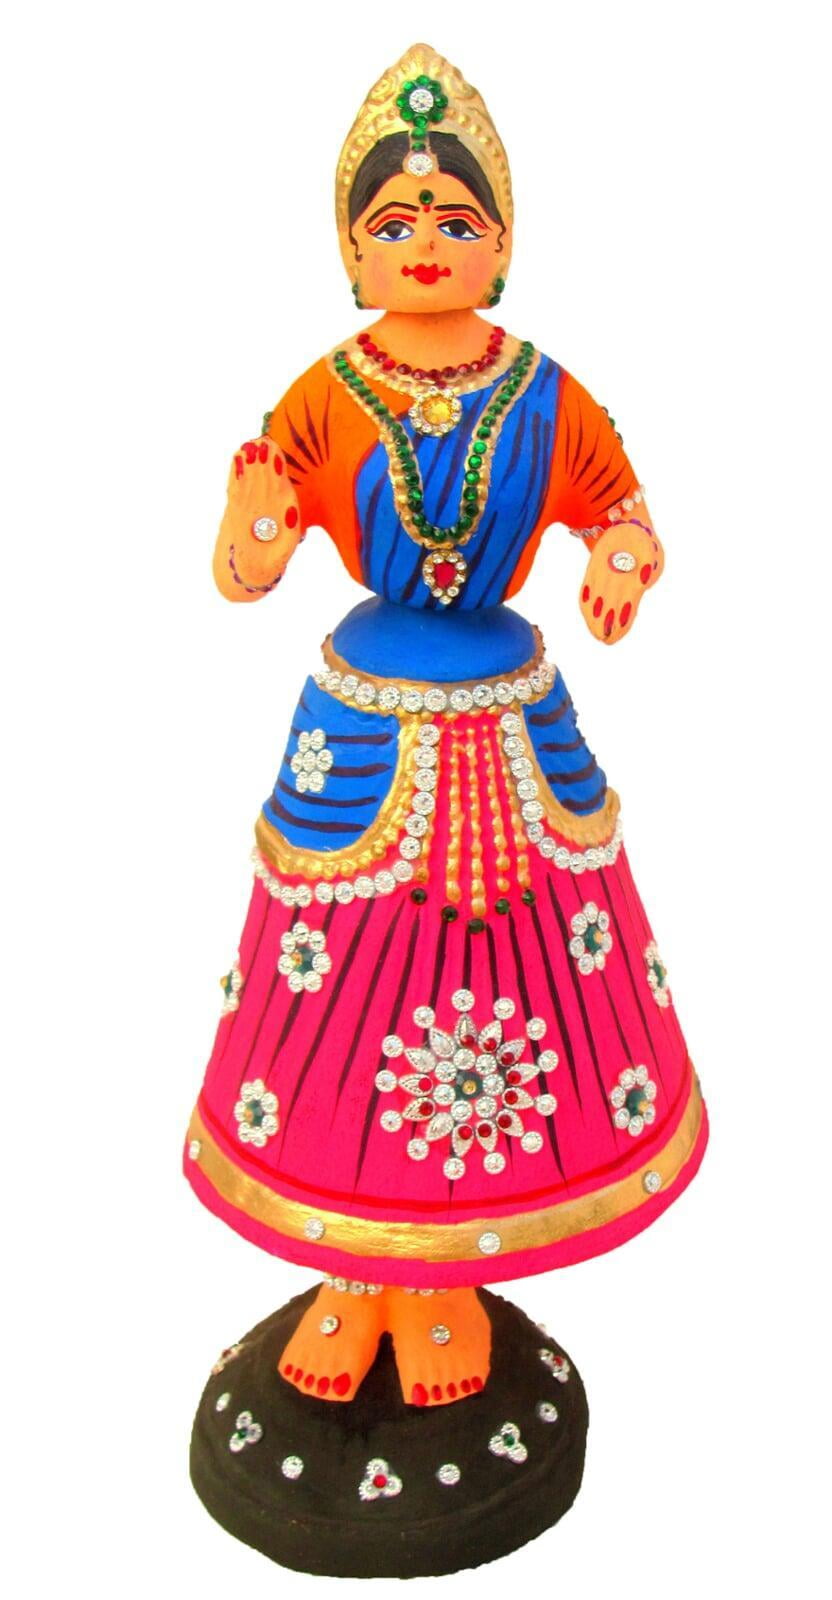 How to assemble a Tanjore Dancing Doll